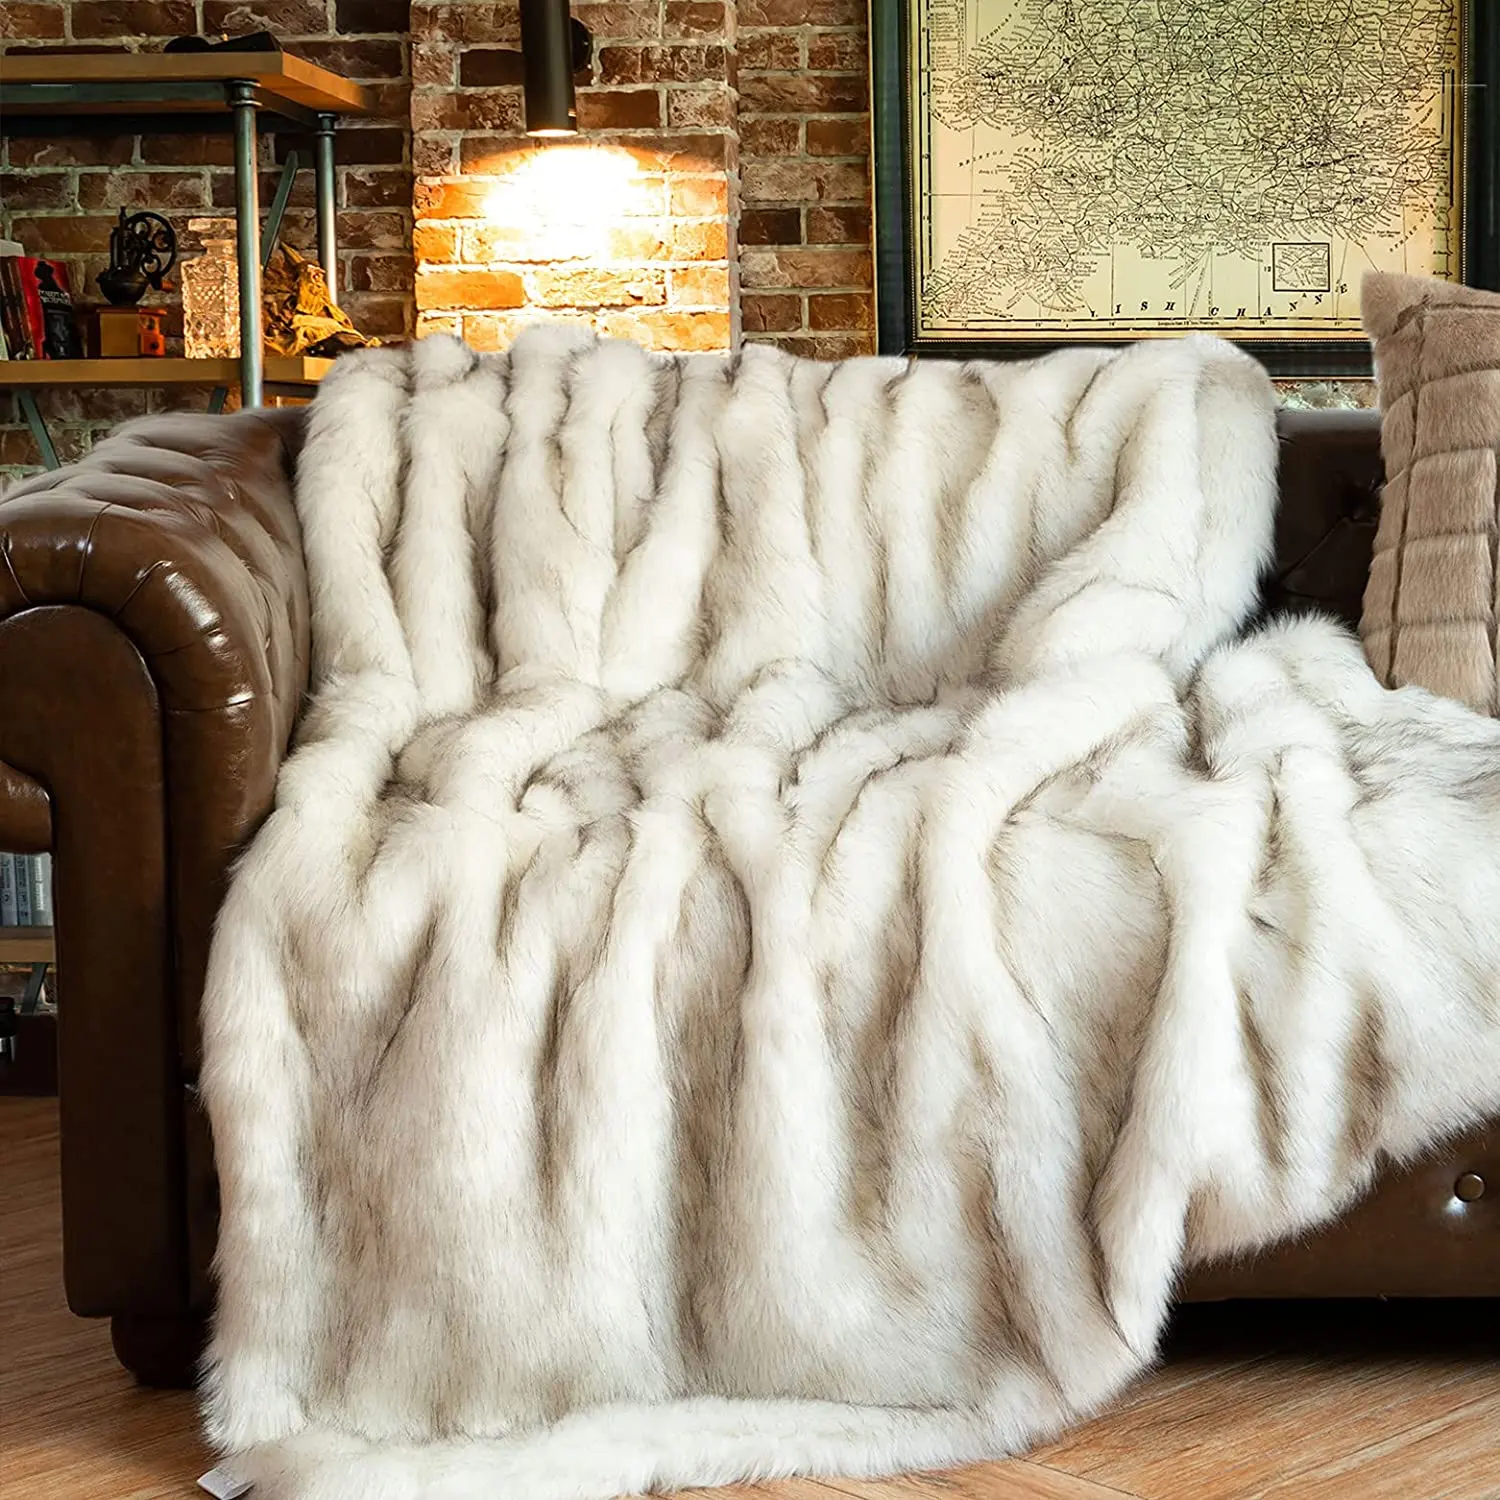 60 x 80 Inches Home Decorative Sofa Bed Luxury Deluxe Contemporary Fox Faux Imitation Fur Throw Blanket Tie Dye Faux Fur Blanket